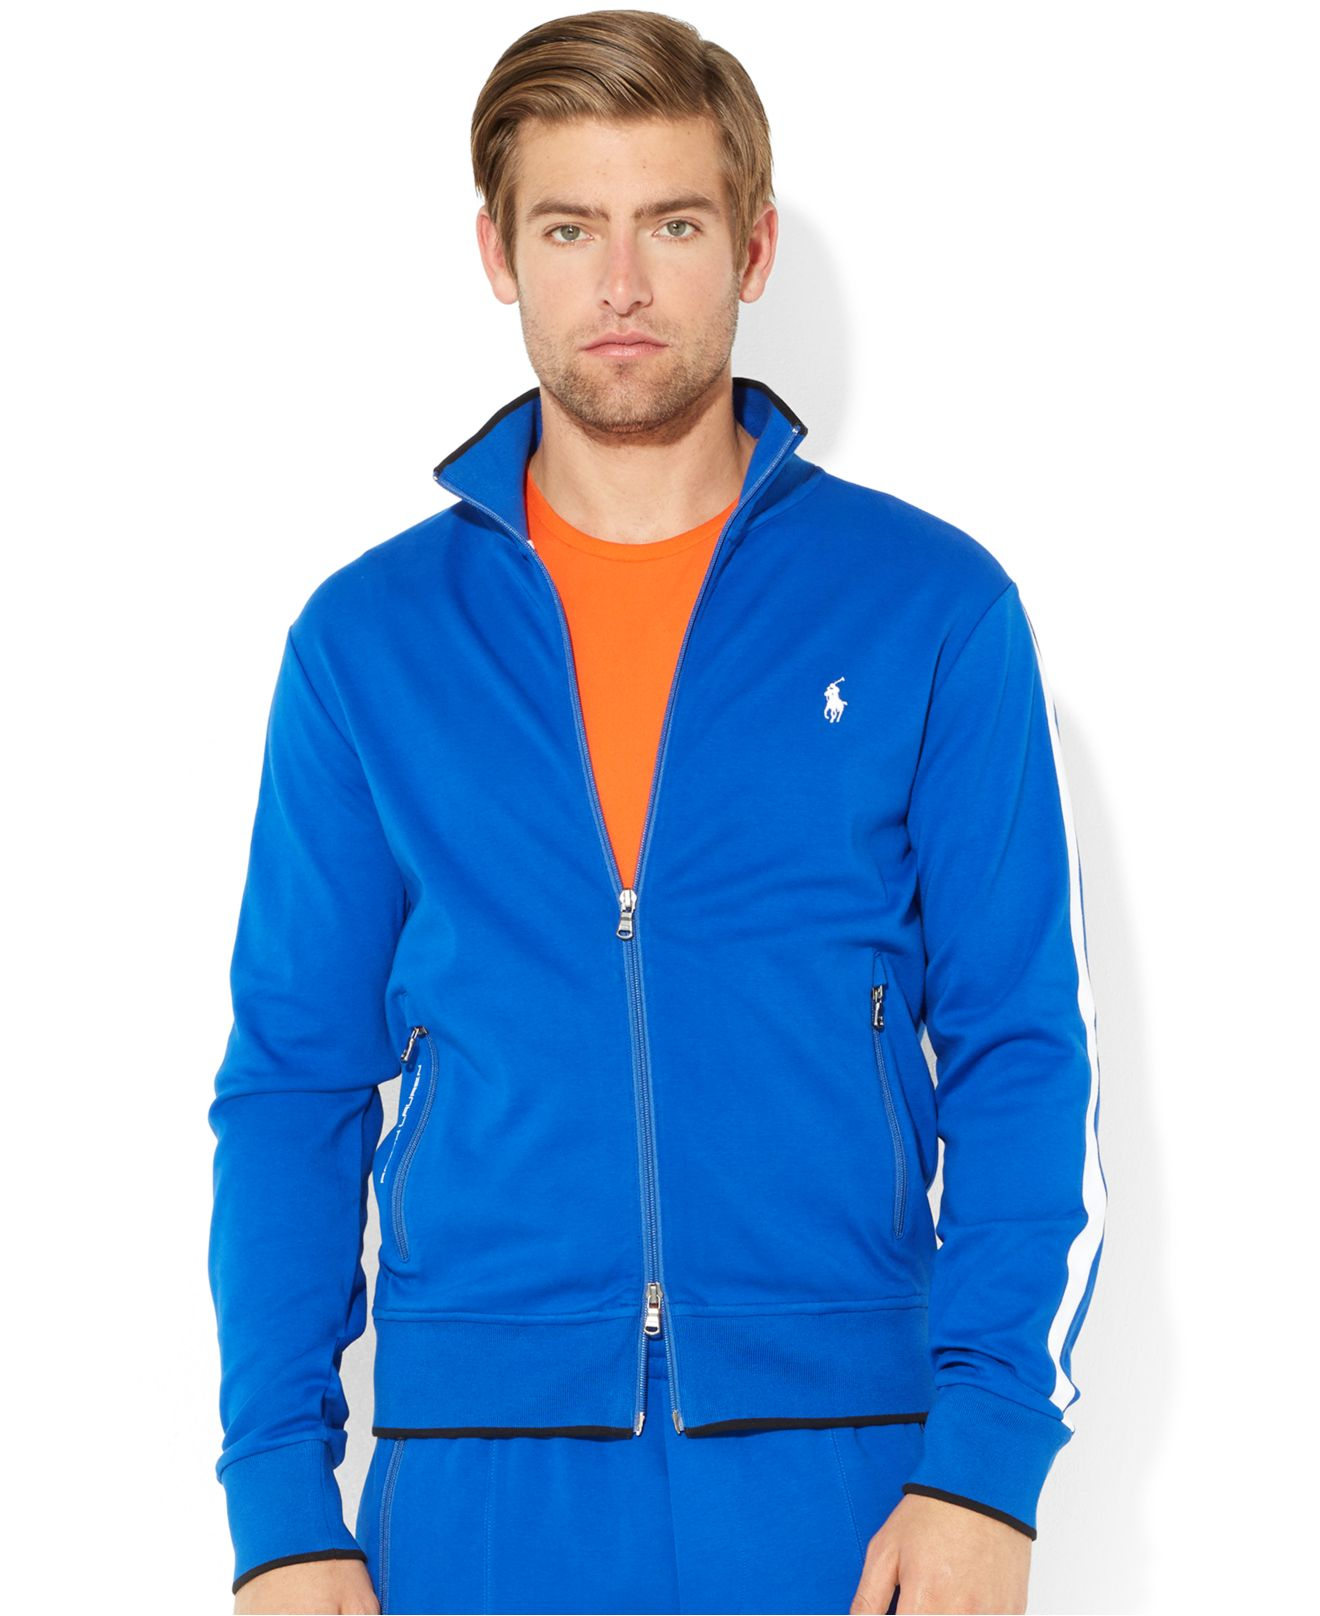 Polo Ralph Lauren Performance Track Jacket in Blue for Men - Lyst